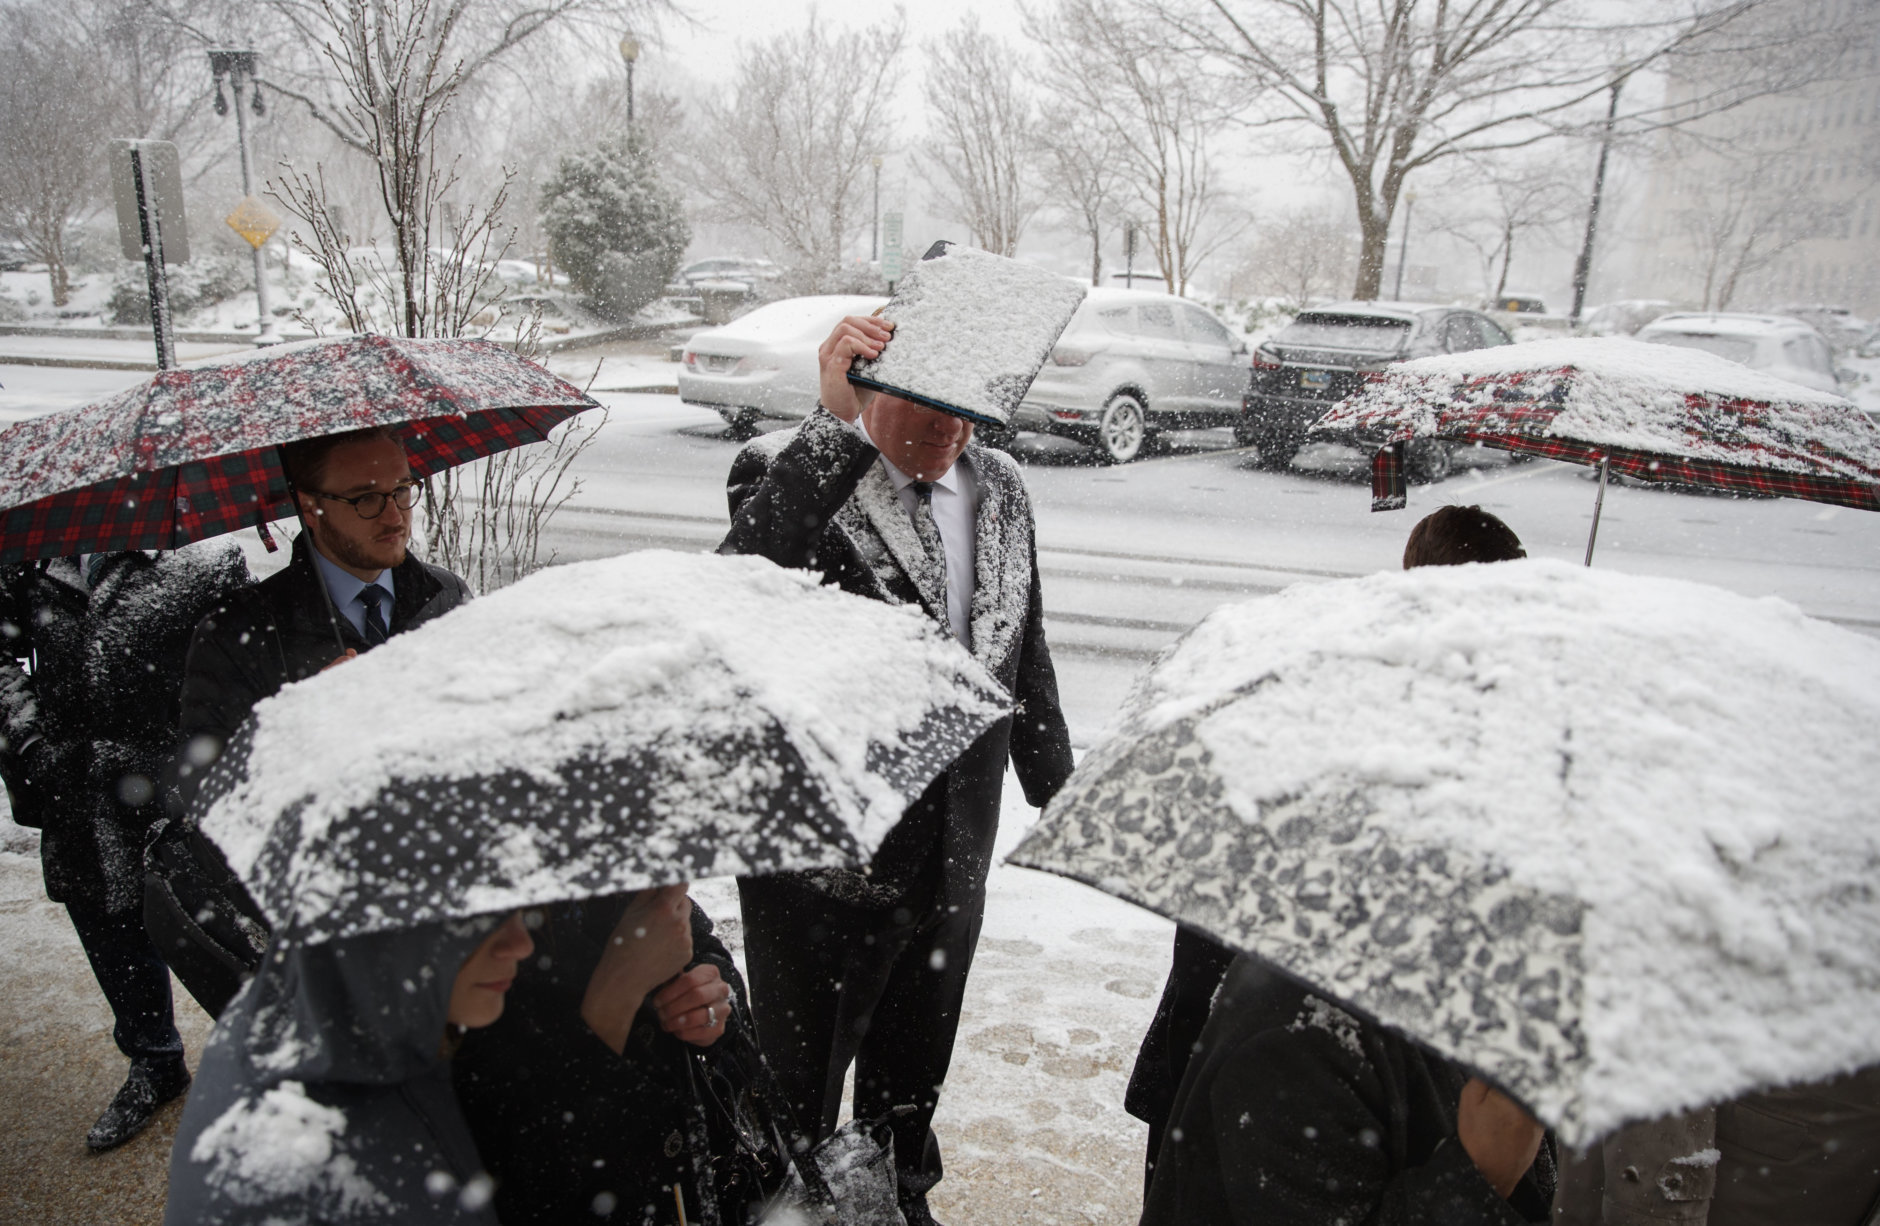 Ben Stein from Brandon, Miss., uses a folder to shield his head from falling snow as he waits in line to go through security to enter Dirksen Senate Office Building on Capitol Hill in Washington, Wednesday, March 21, 2018. The coming spring nor'easter caused the federal government to close its offices in the Washington area. (AP Photo/Carolyn Kaster)